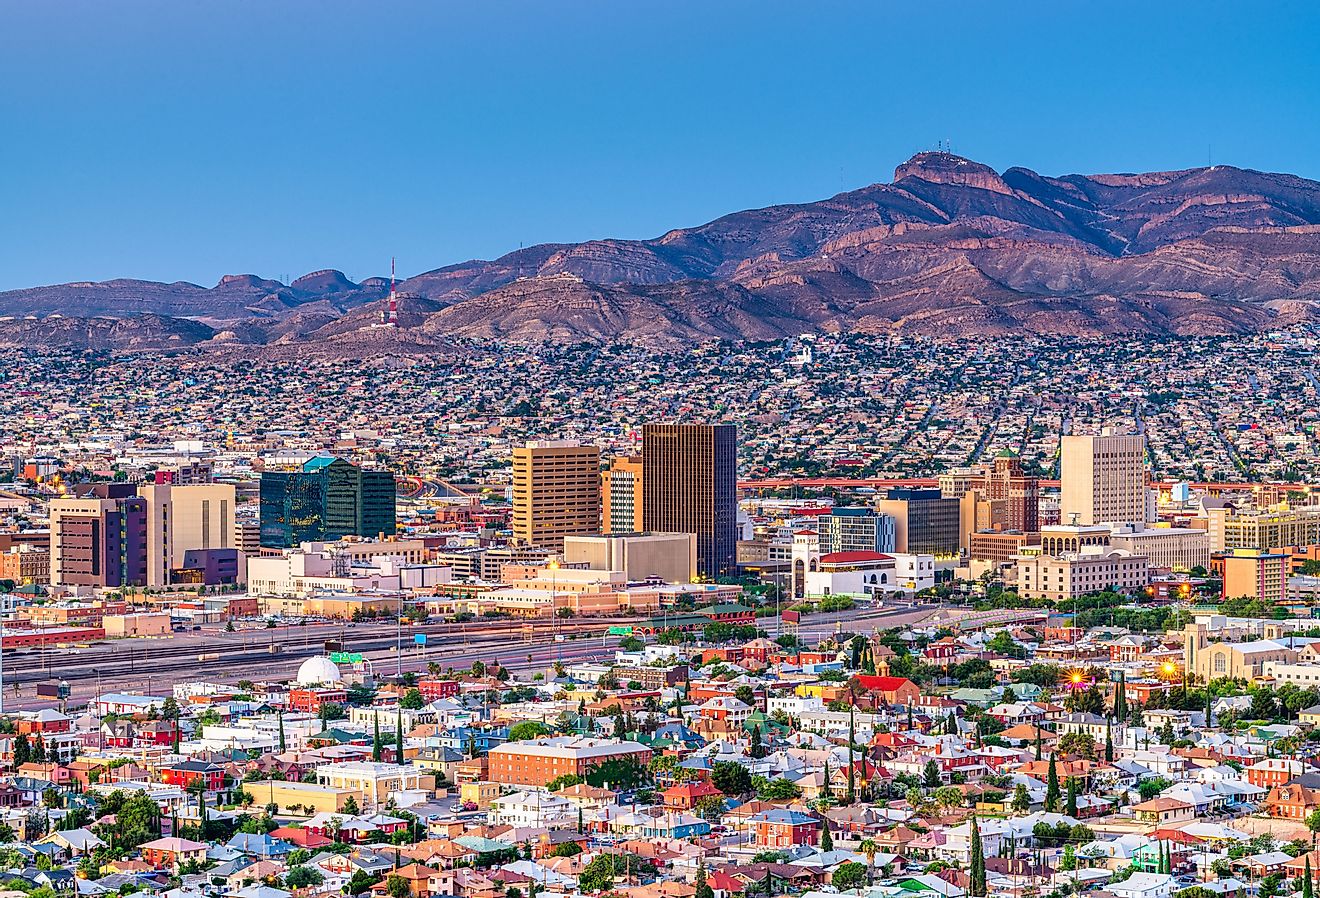 El Paso, Texas is the sunniest city in the US.